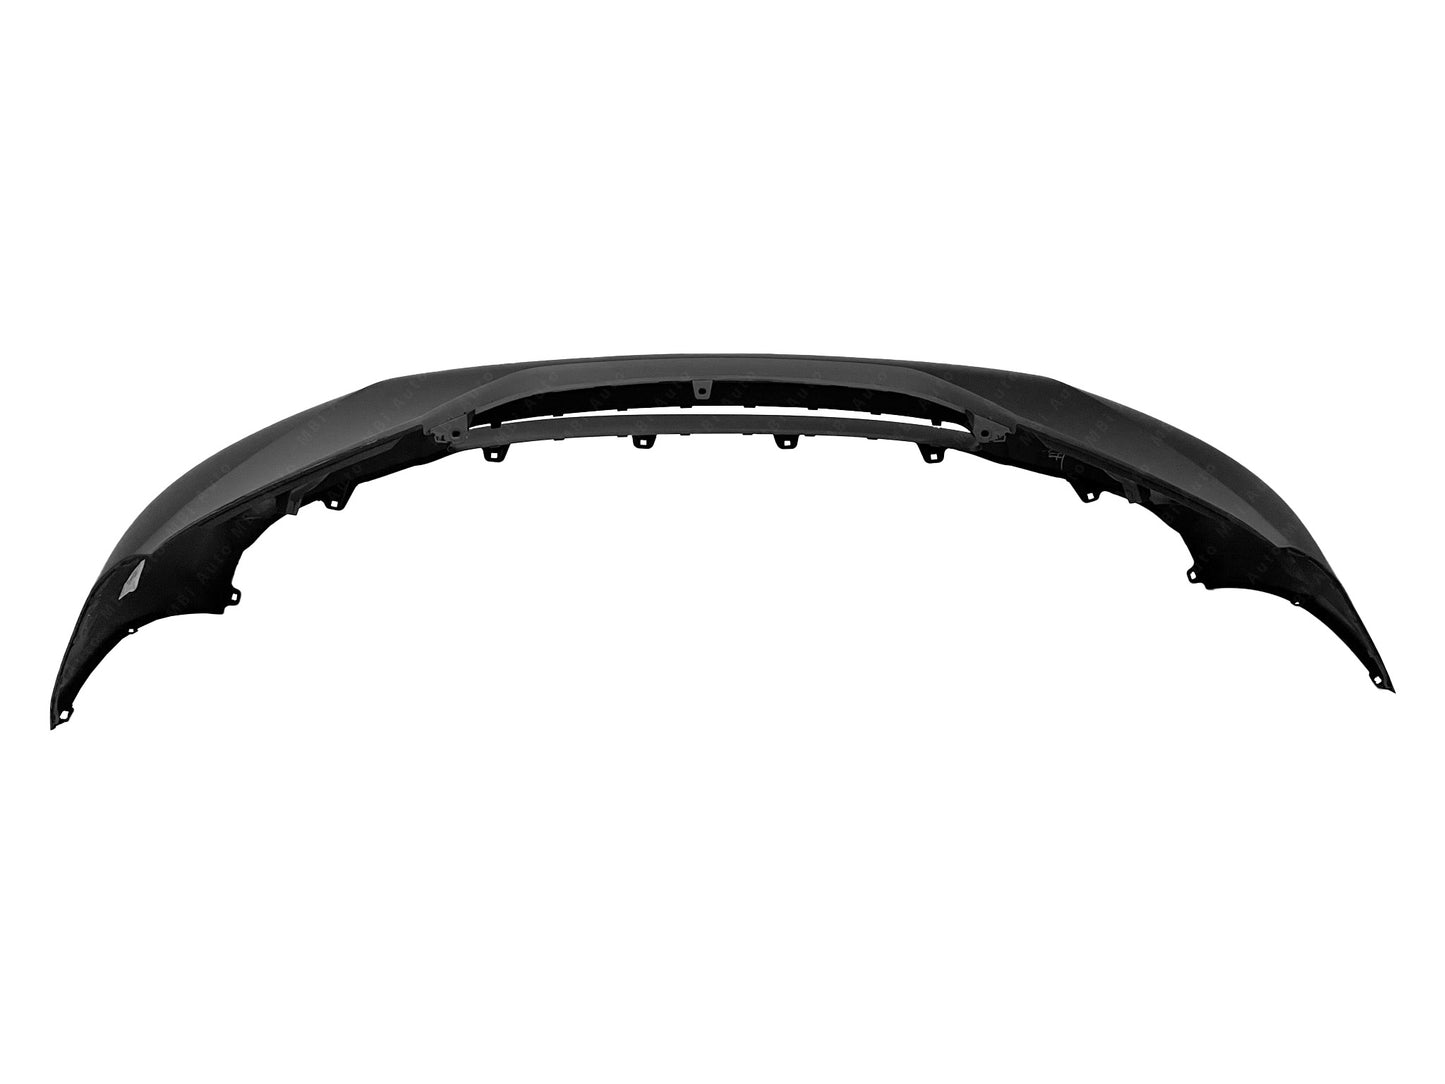 Toyota Sienna 2011 - 2017 Front Bumper Cover 11 - 17 TO1000369 Bumper-King